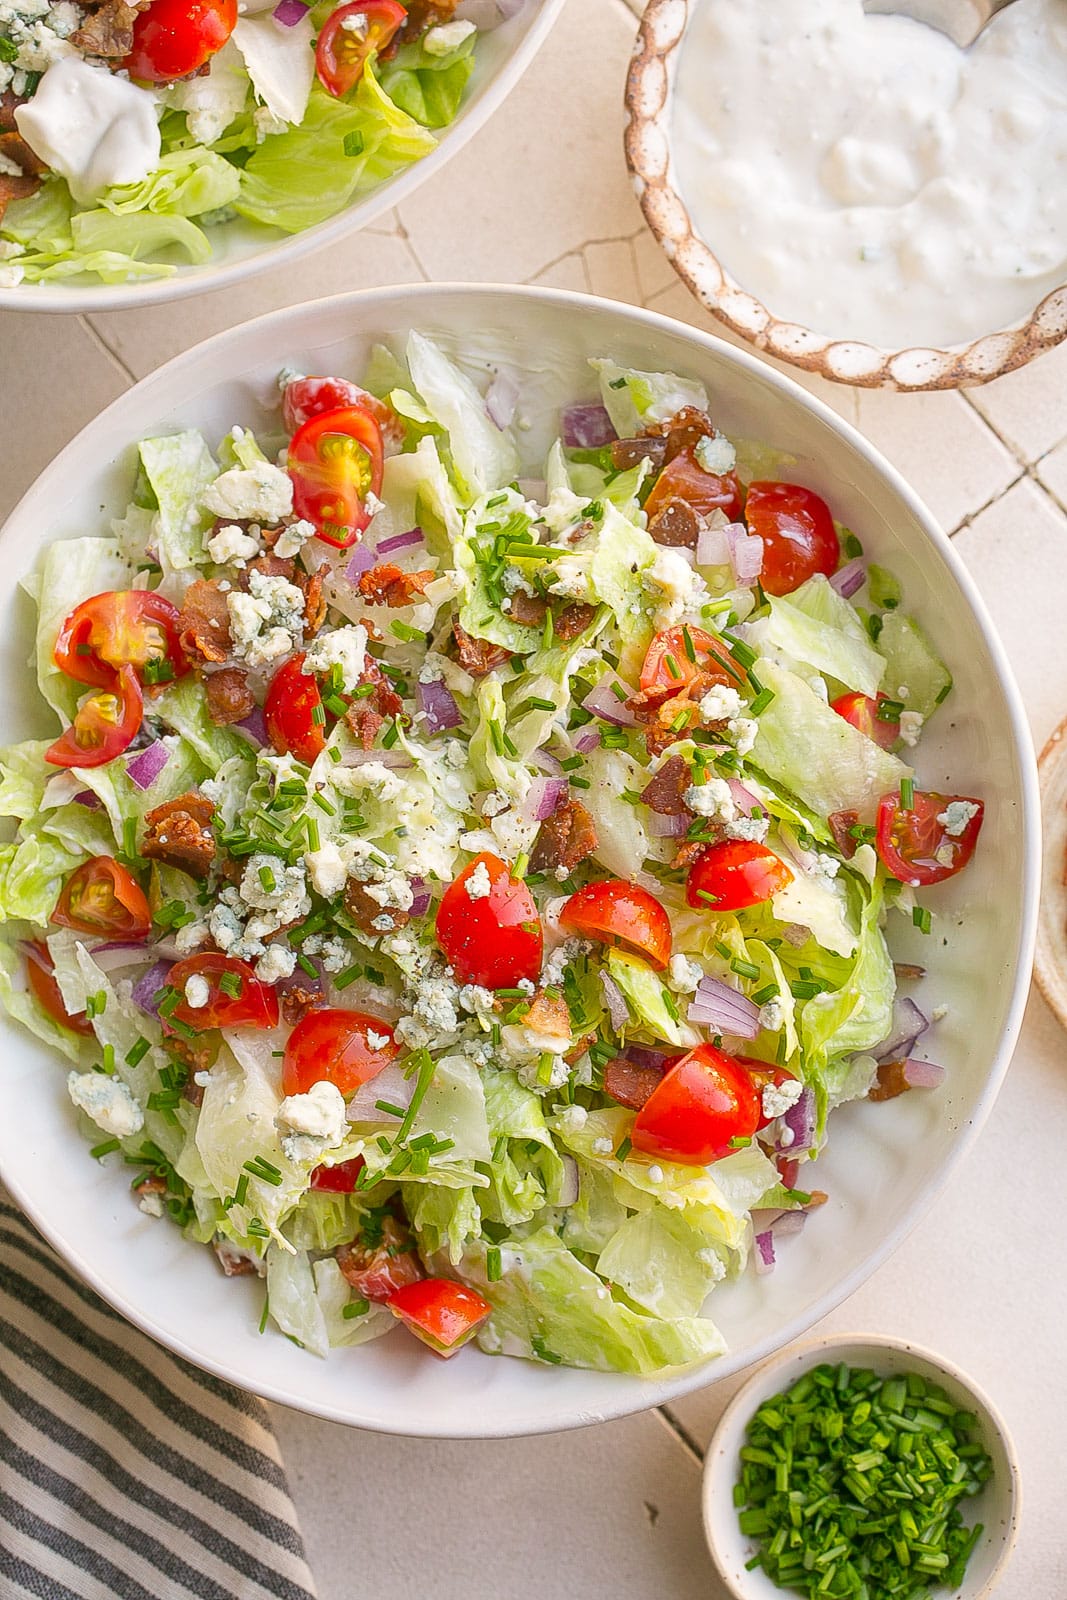 Salad with blue cheese crumbles on top.